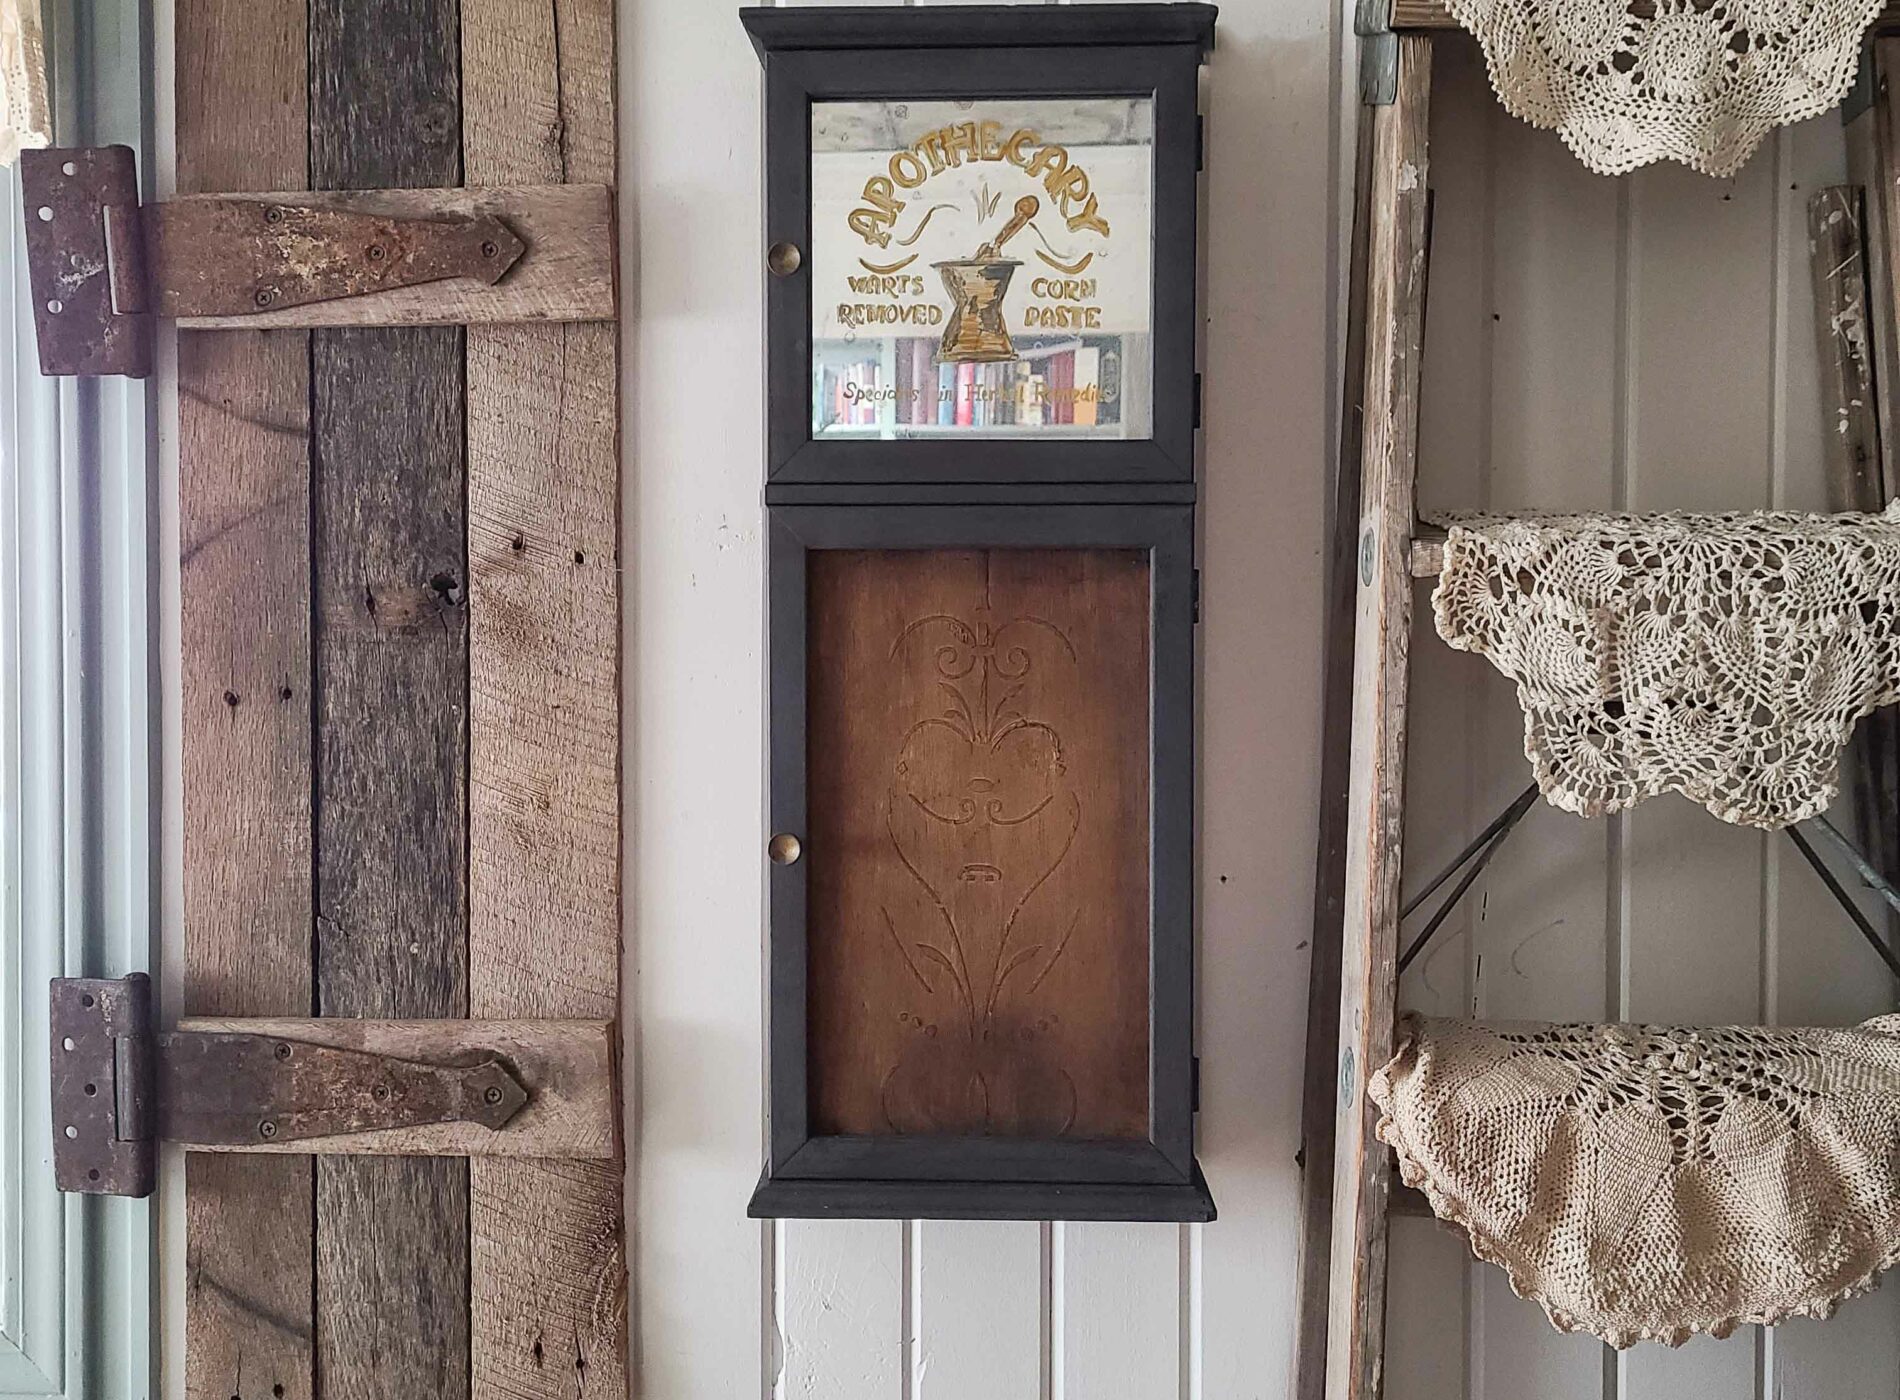 Apothecary Wall Cabinet available at Prodigal Pieces | shop.prodigalpieces.com #prodigalpieces